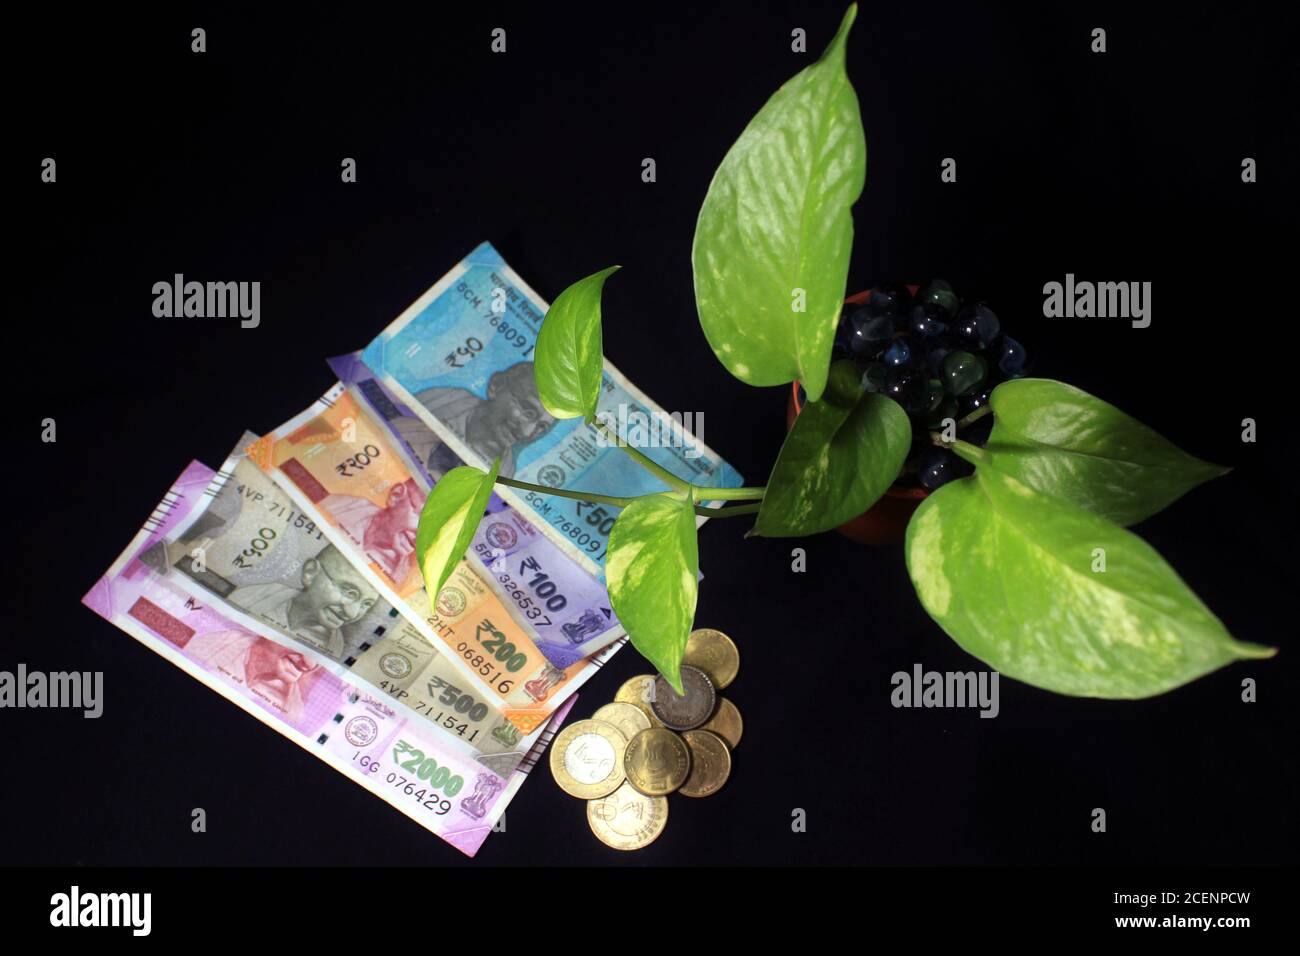 Devil's ivy (Epipremnum aureum) or Money plant leaf with 50, 100, 200, 500, 2000 rupee currency note on black background. Bank note with plant growing Stock Photo